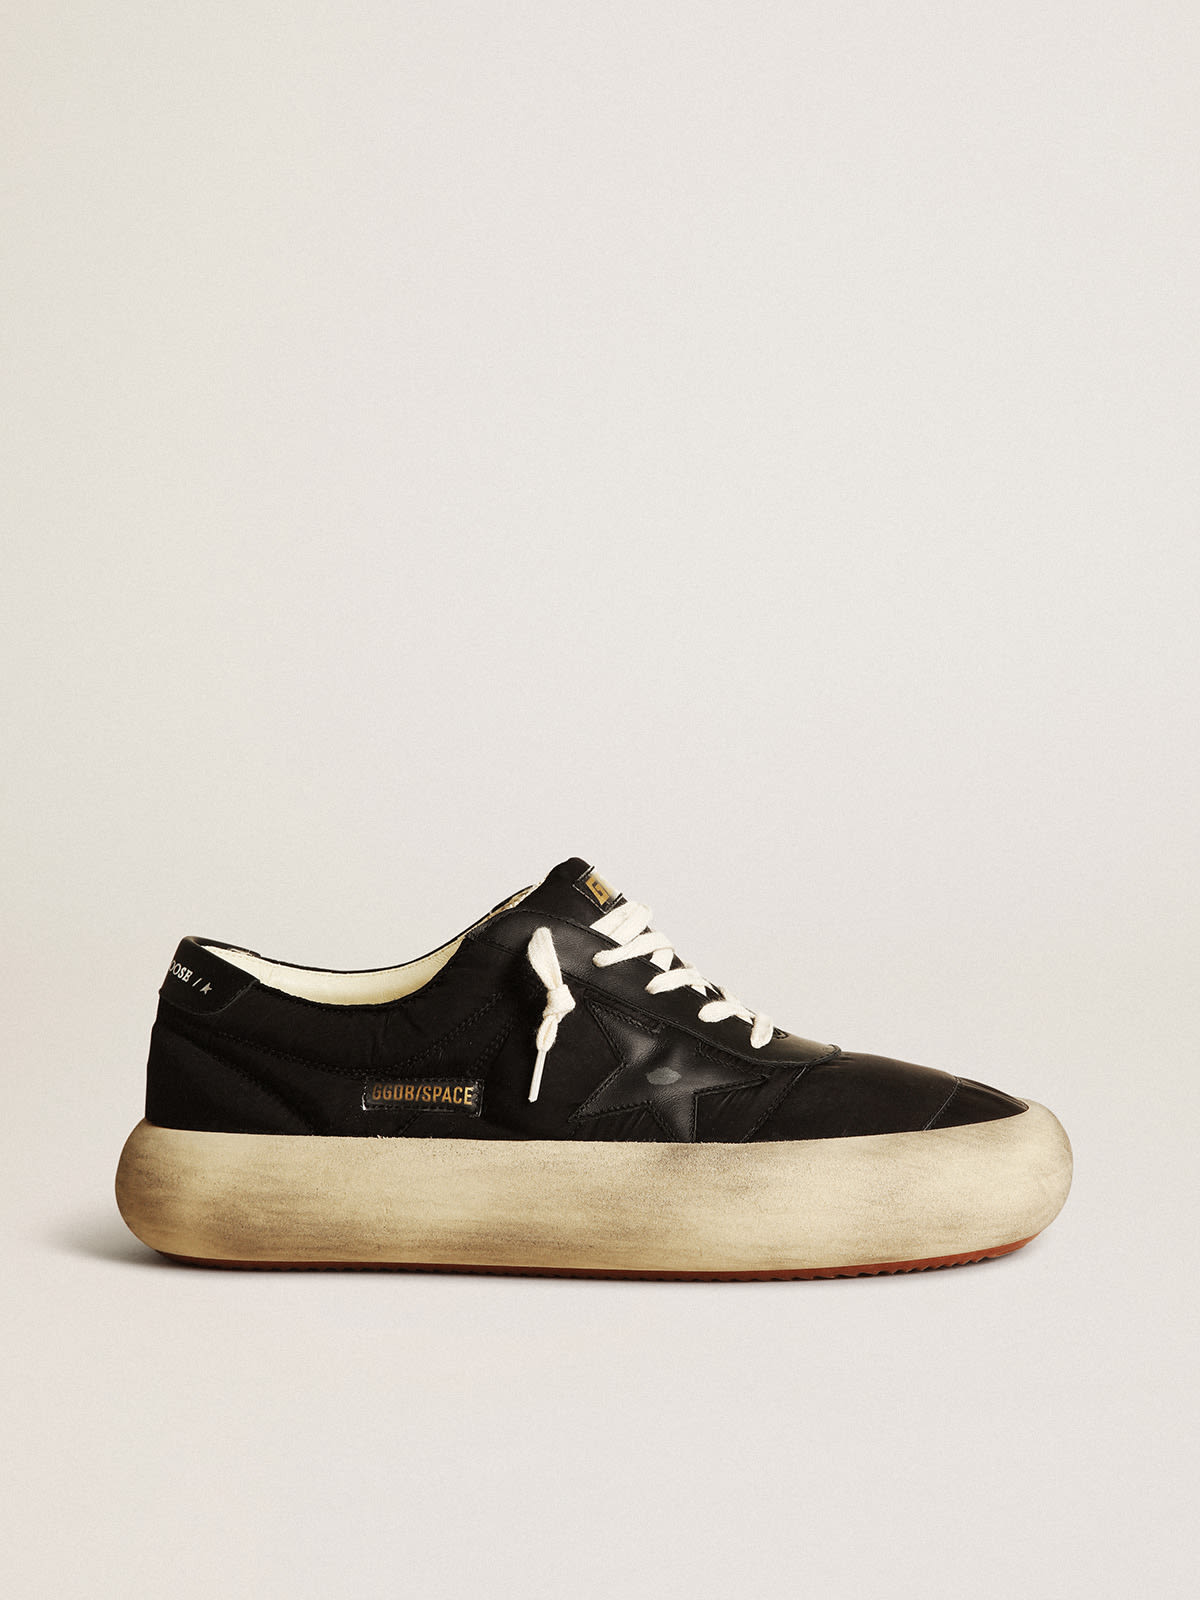 Golden Goose - Men’s Space-Star in nylon with black leather star and heel tab in 